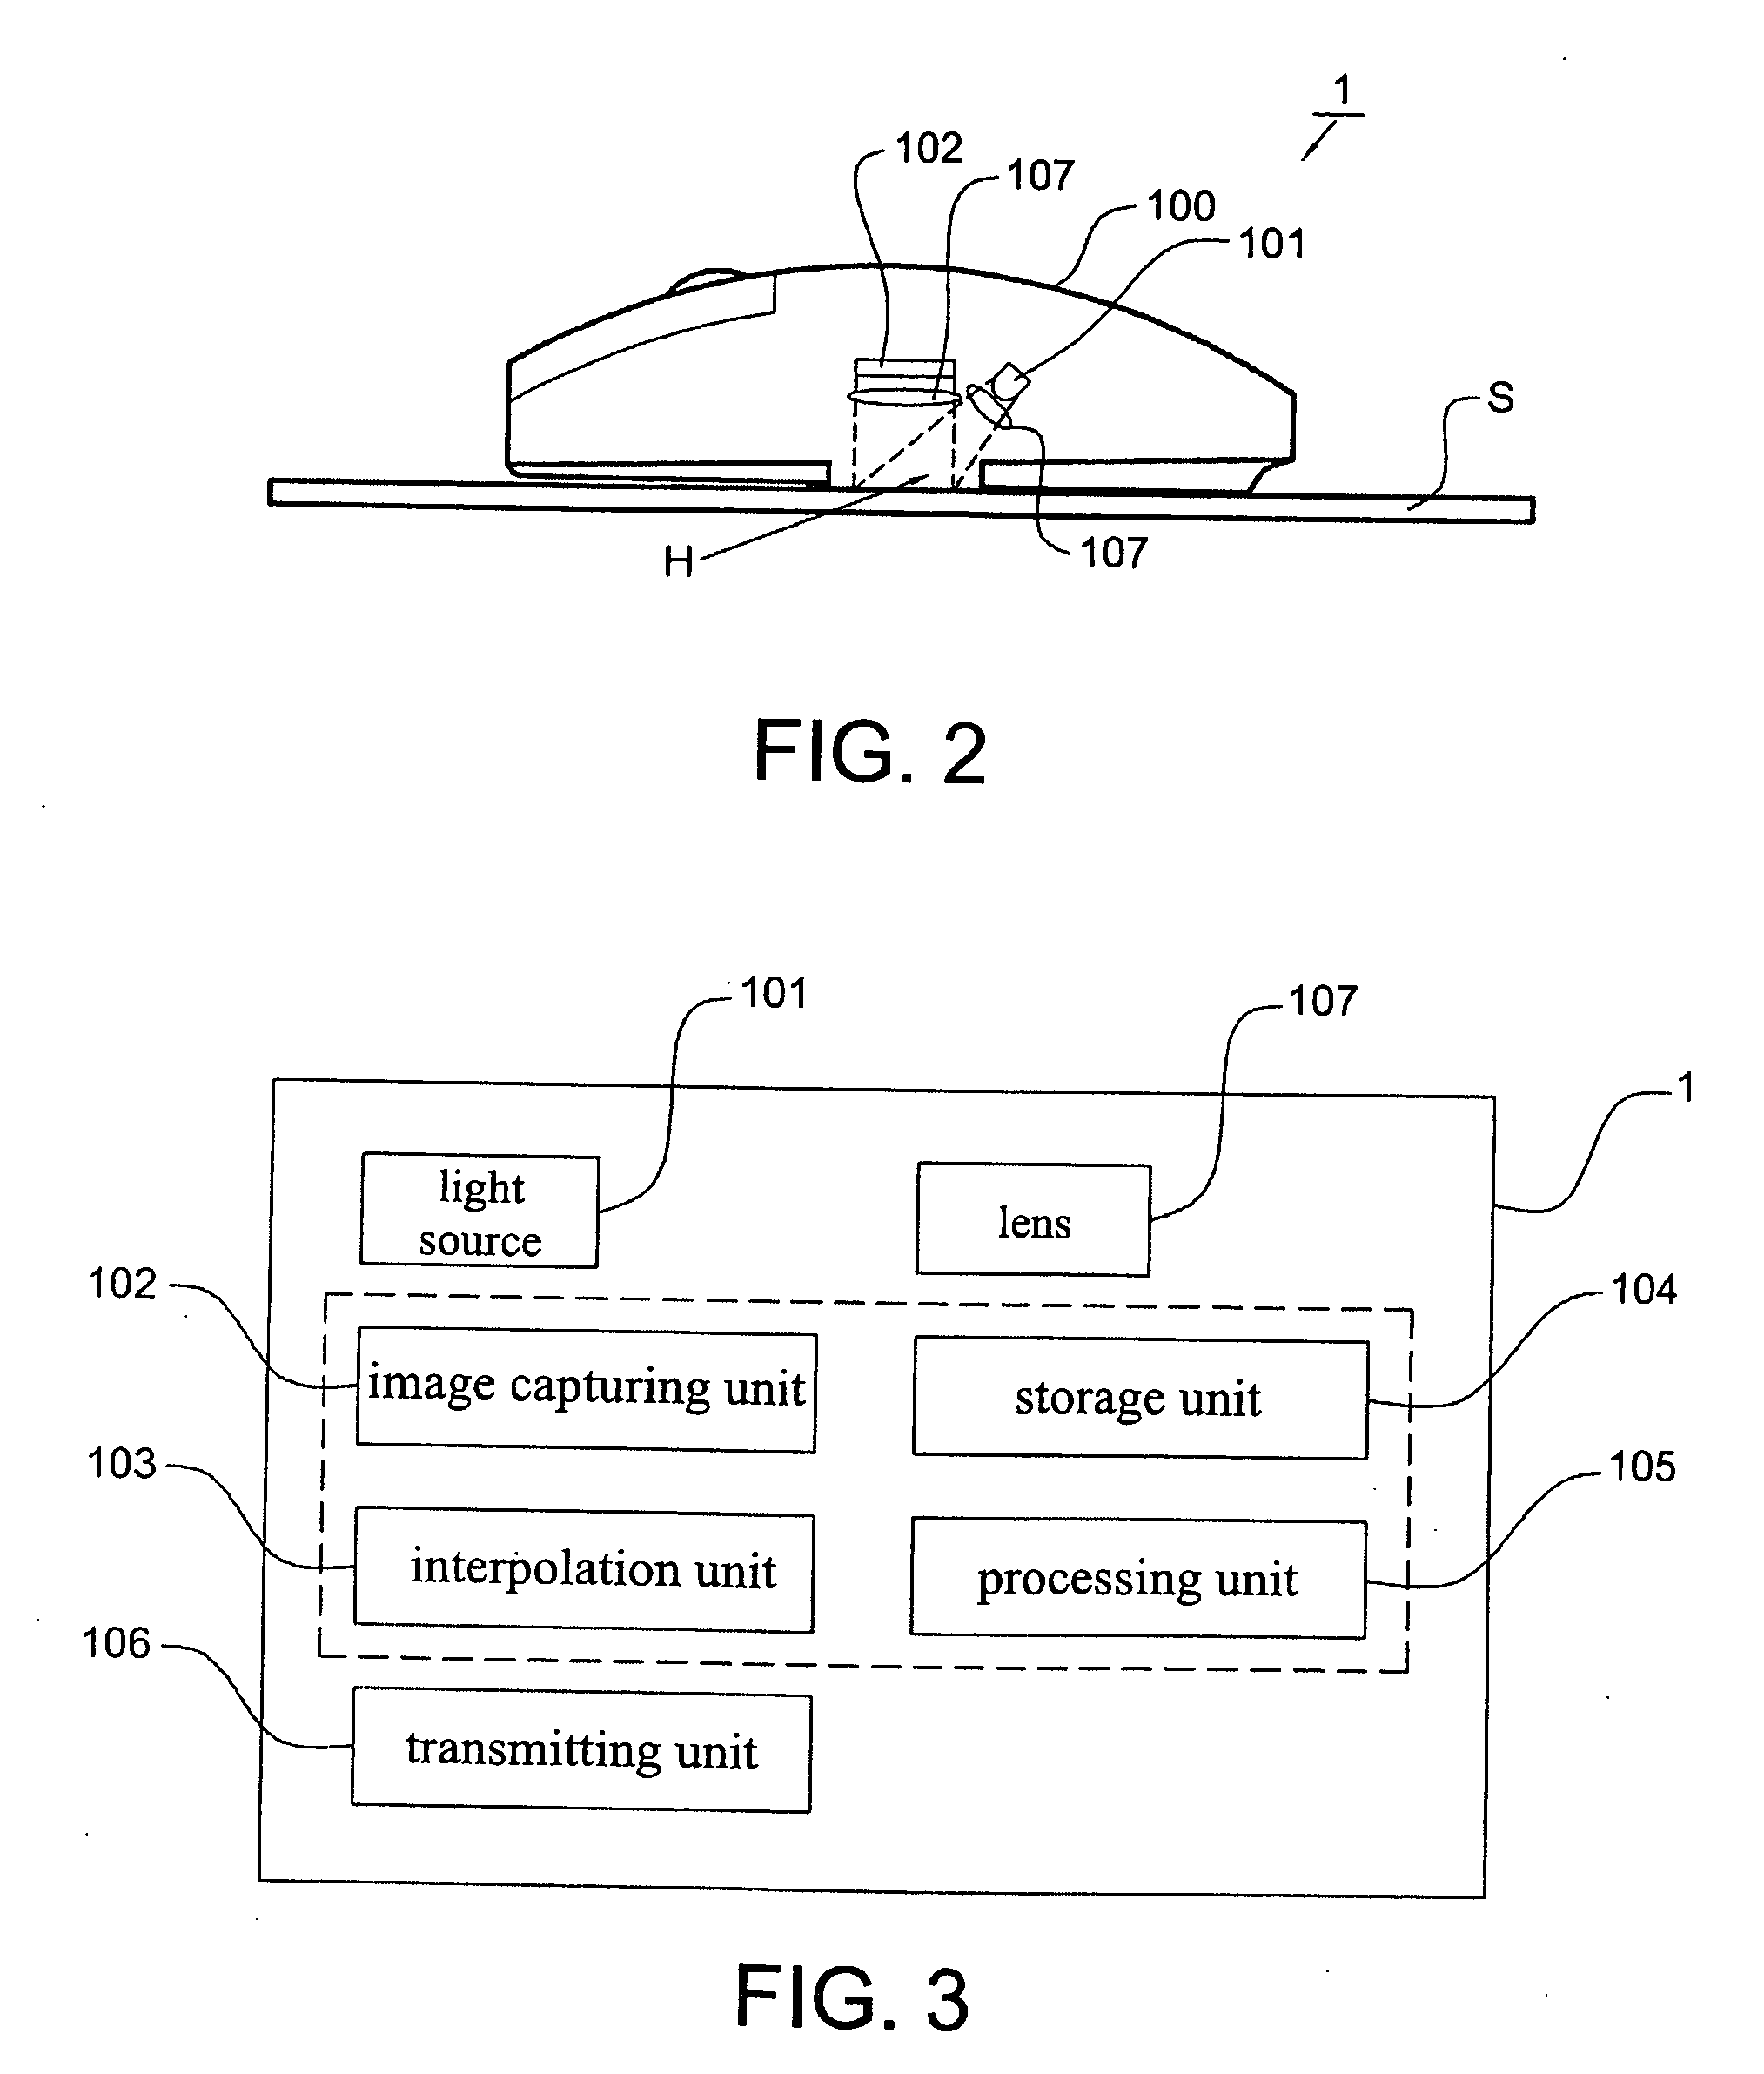 Method and apparatus for detecting displacement with sub-pixel accuracy